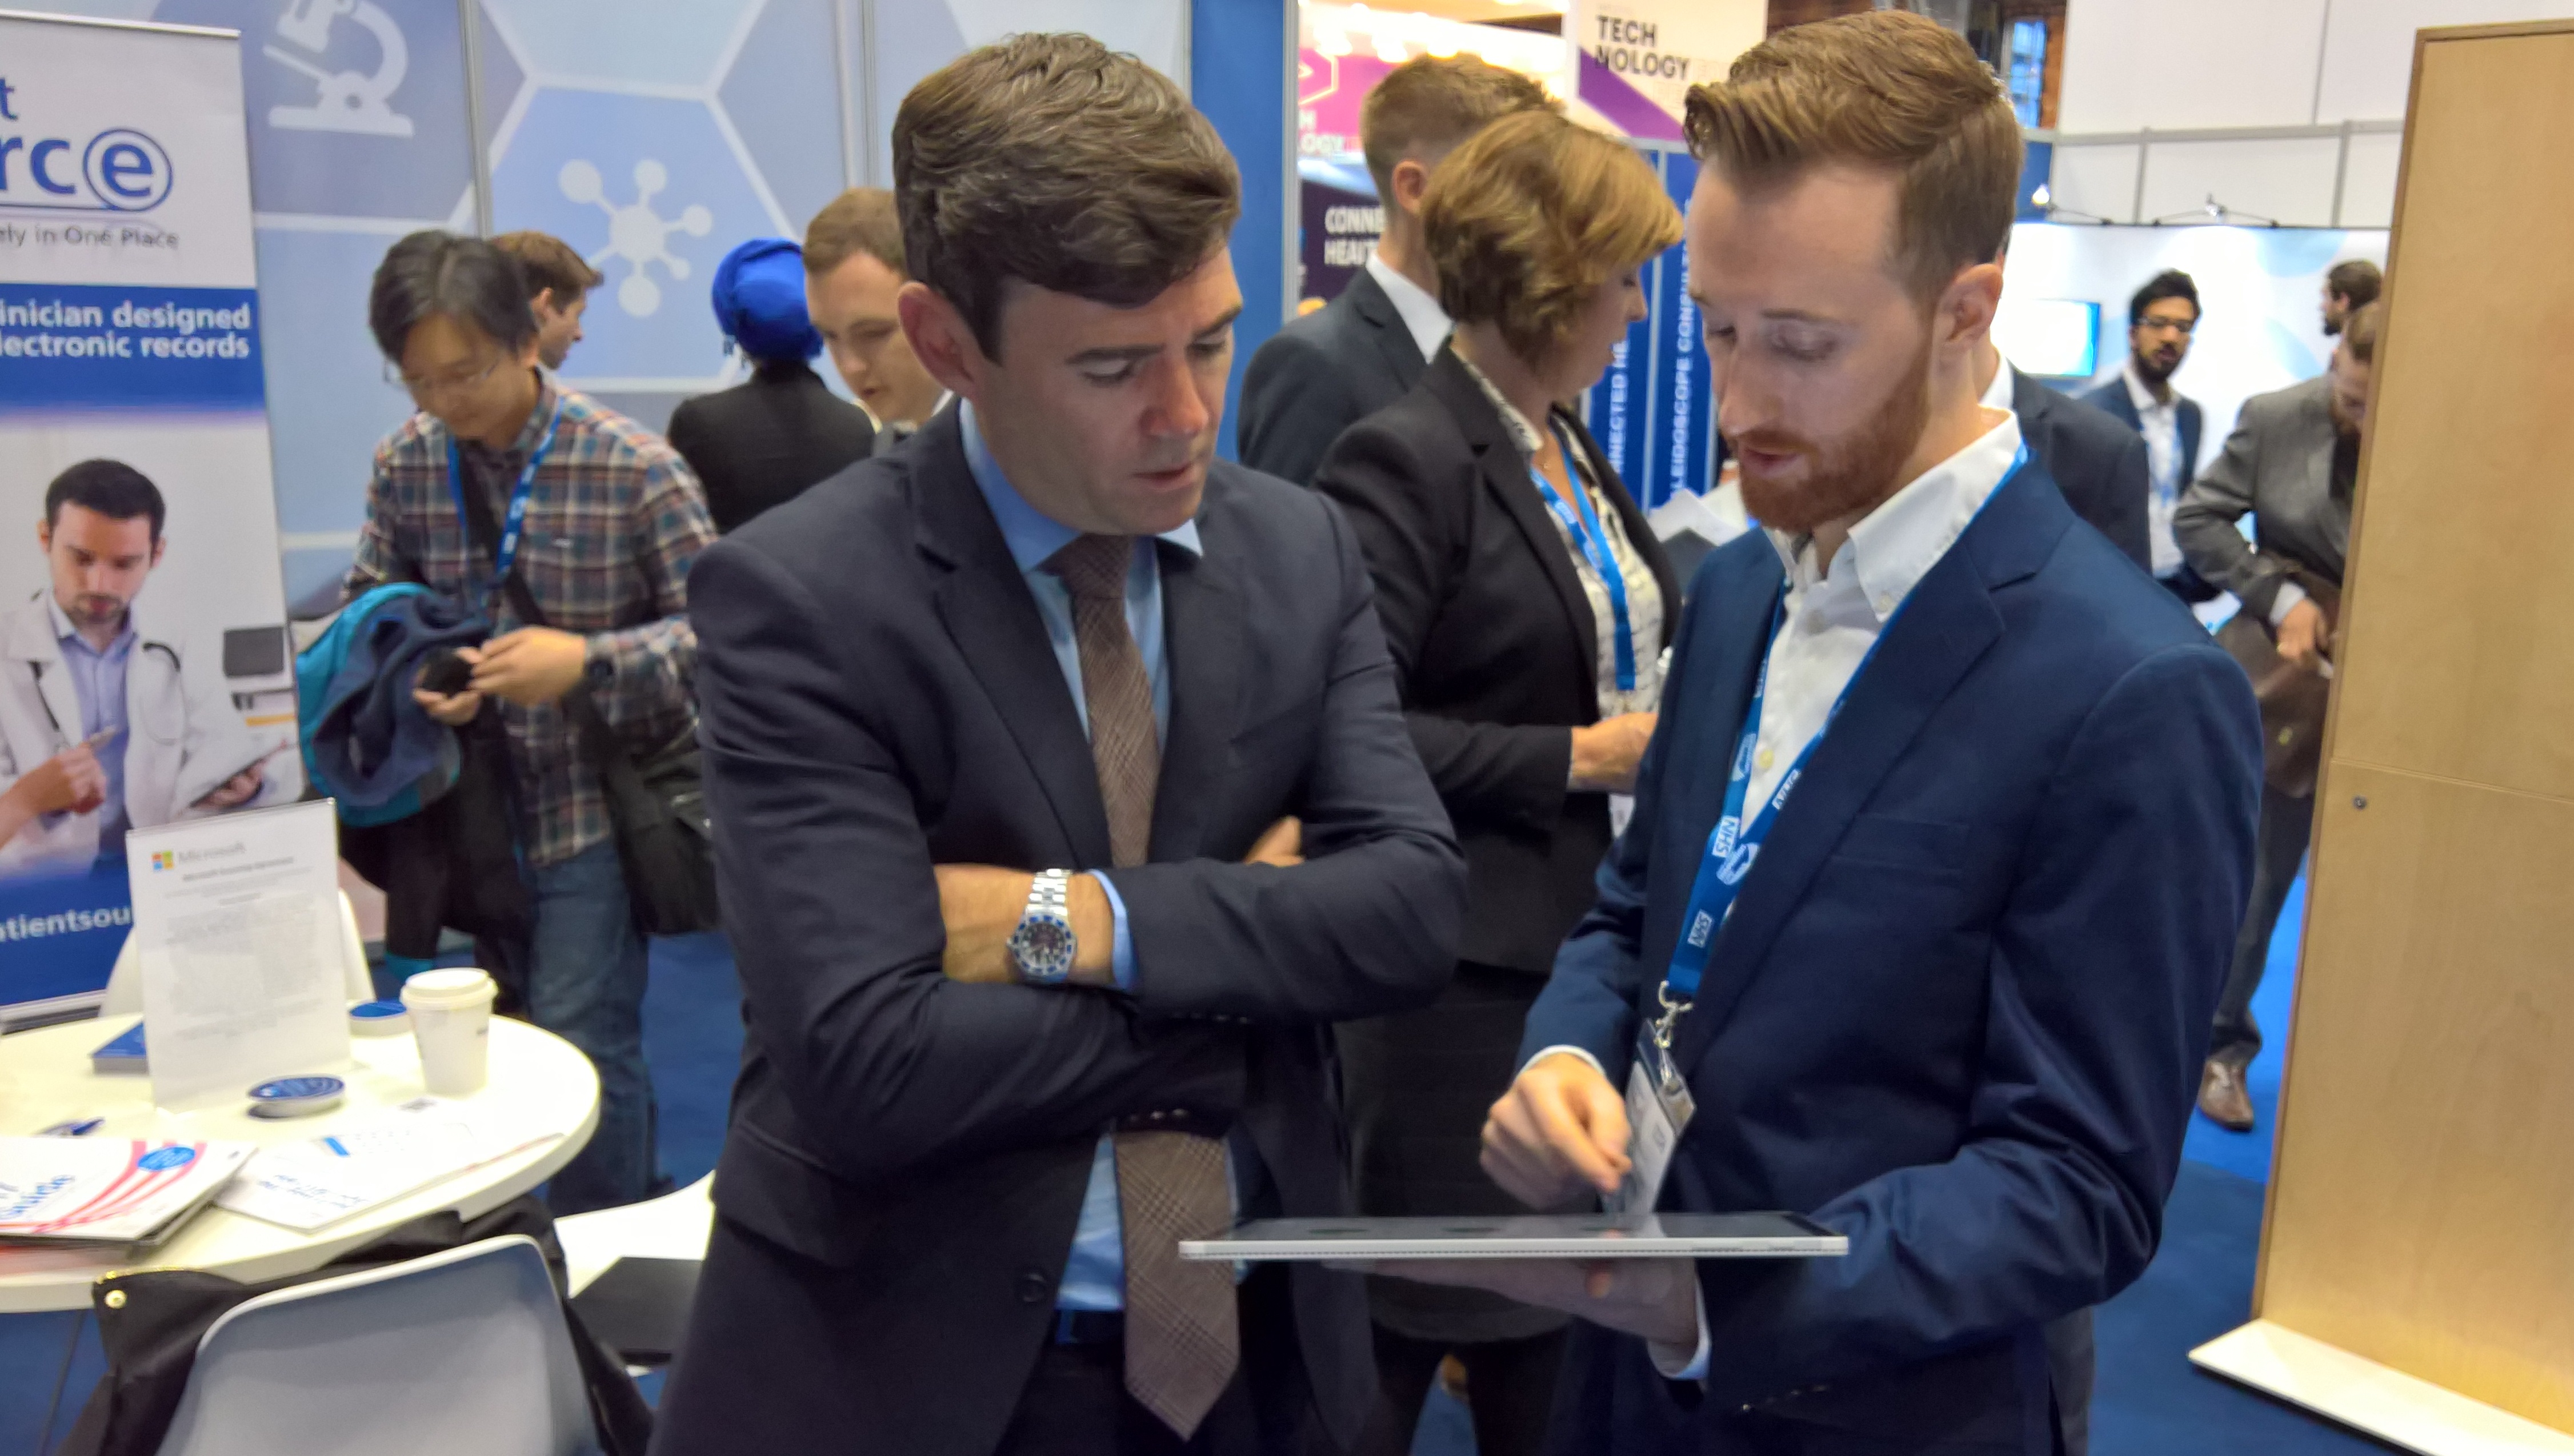 Andy Burnham (left), Mayor of Greater Manchester, visits the Microsoft stand